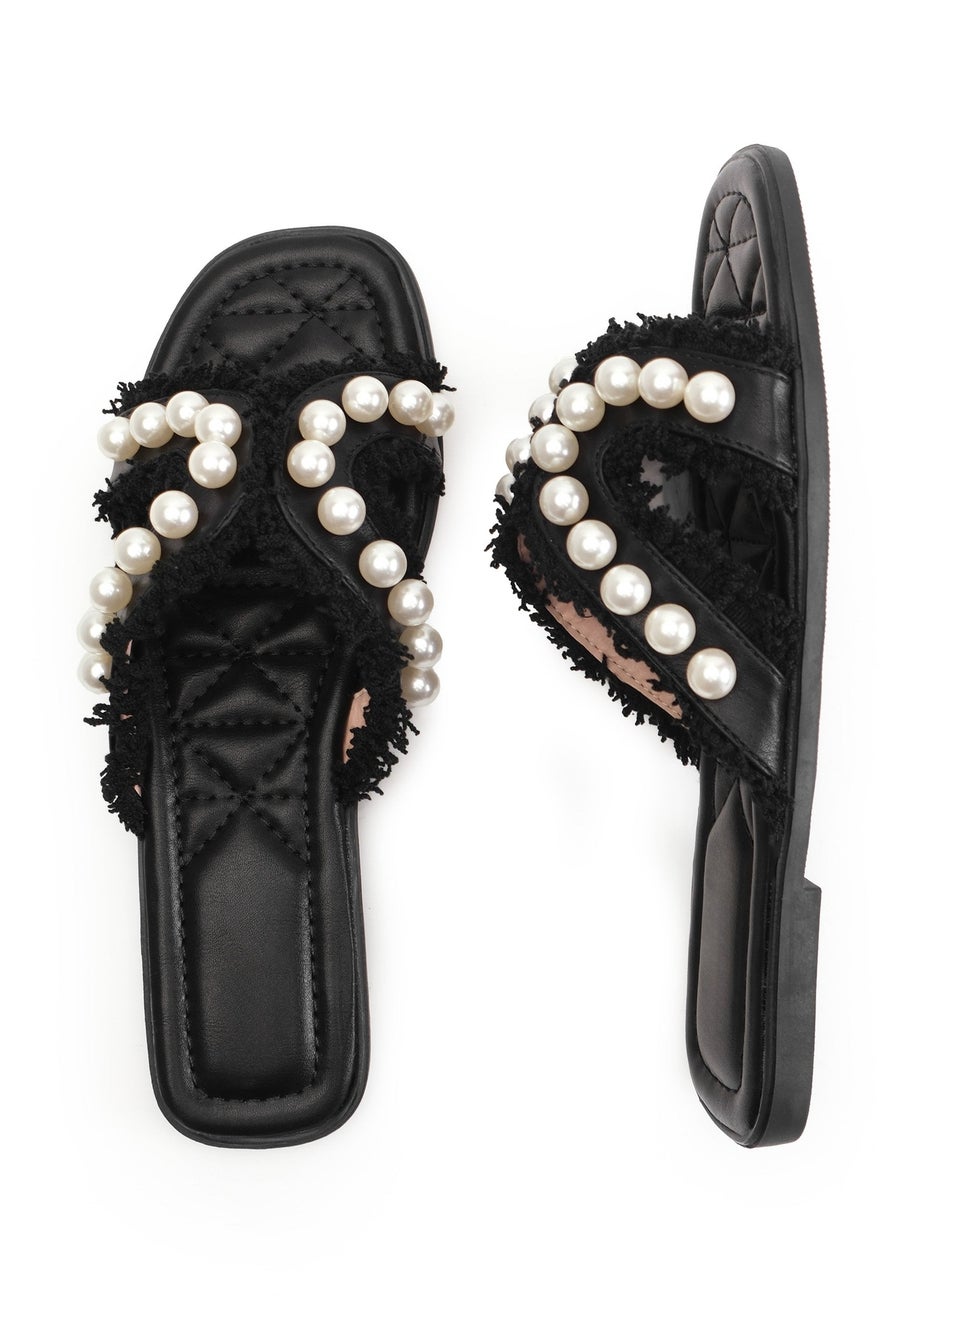 Where's That From Black Pu Vivienne Sandal With Pearl Detail